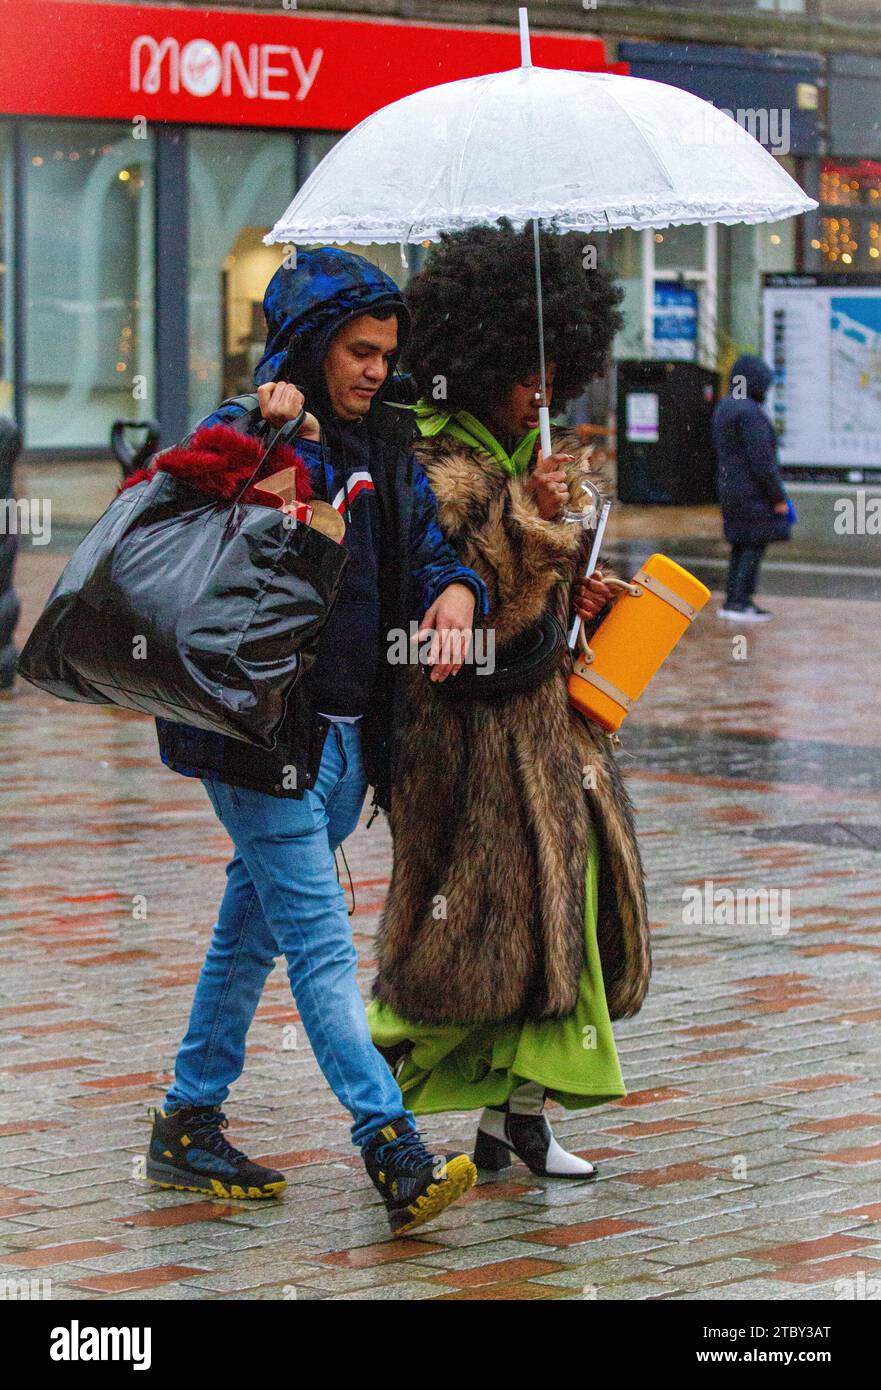 Dundee, Tayside, Scotland, UK. 9th Dec, 2023. UK Weather: A rain warning is in effect as heavy rain continues to keep falling across Northeast Scotland. Dundee locals go Christmas shopping in the city centre over the weekend, wrapped up against the bitter cold and torrential downpours. Credit: Dundee Photographics/Alamy Live News Stock Photo